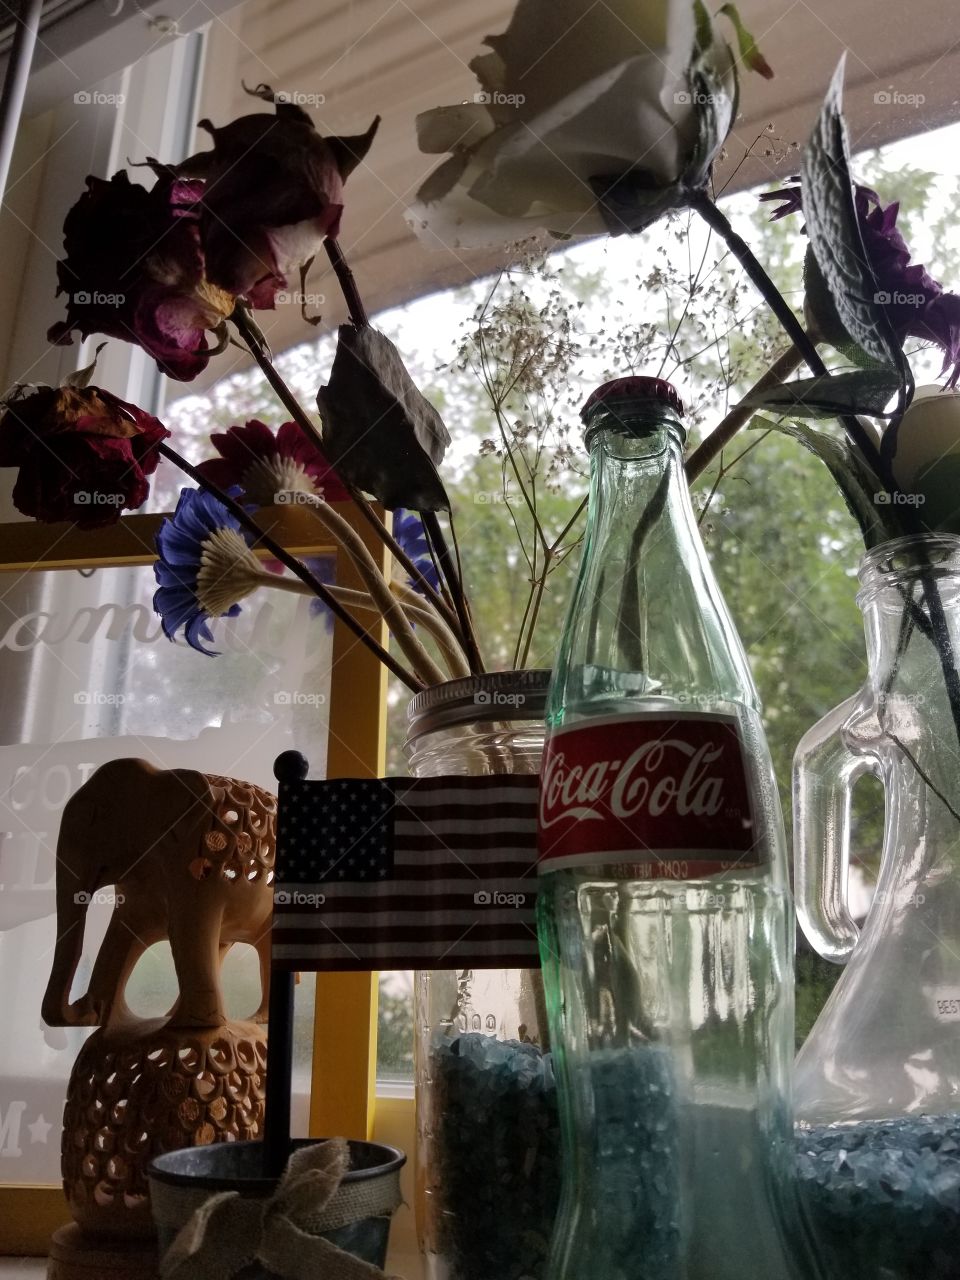 Life is better with a coke. Especially when it is one from Mexico made with real sugar and bottled in a glass container